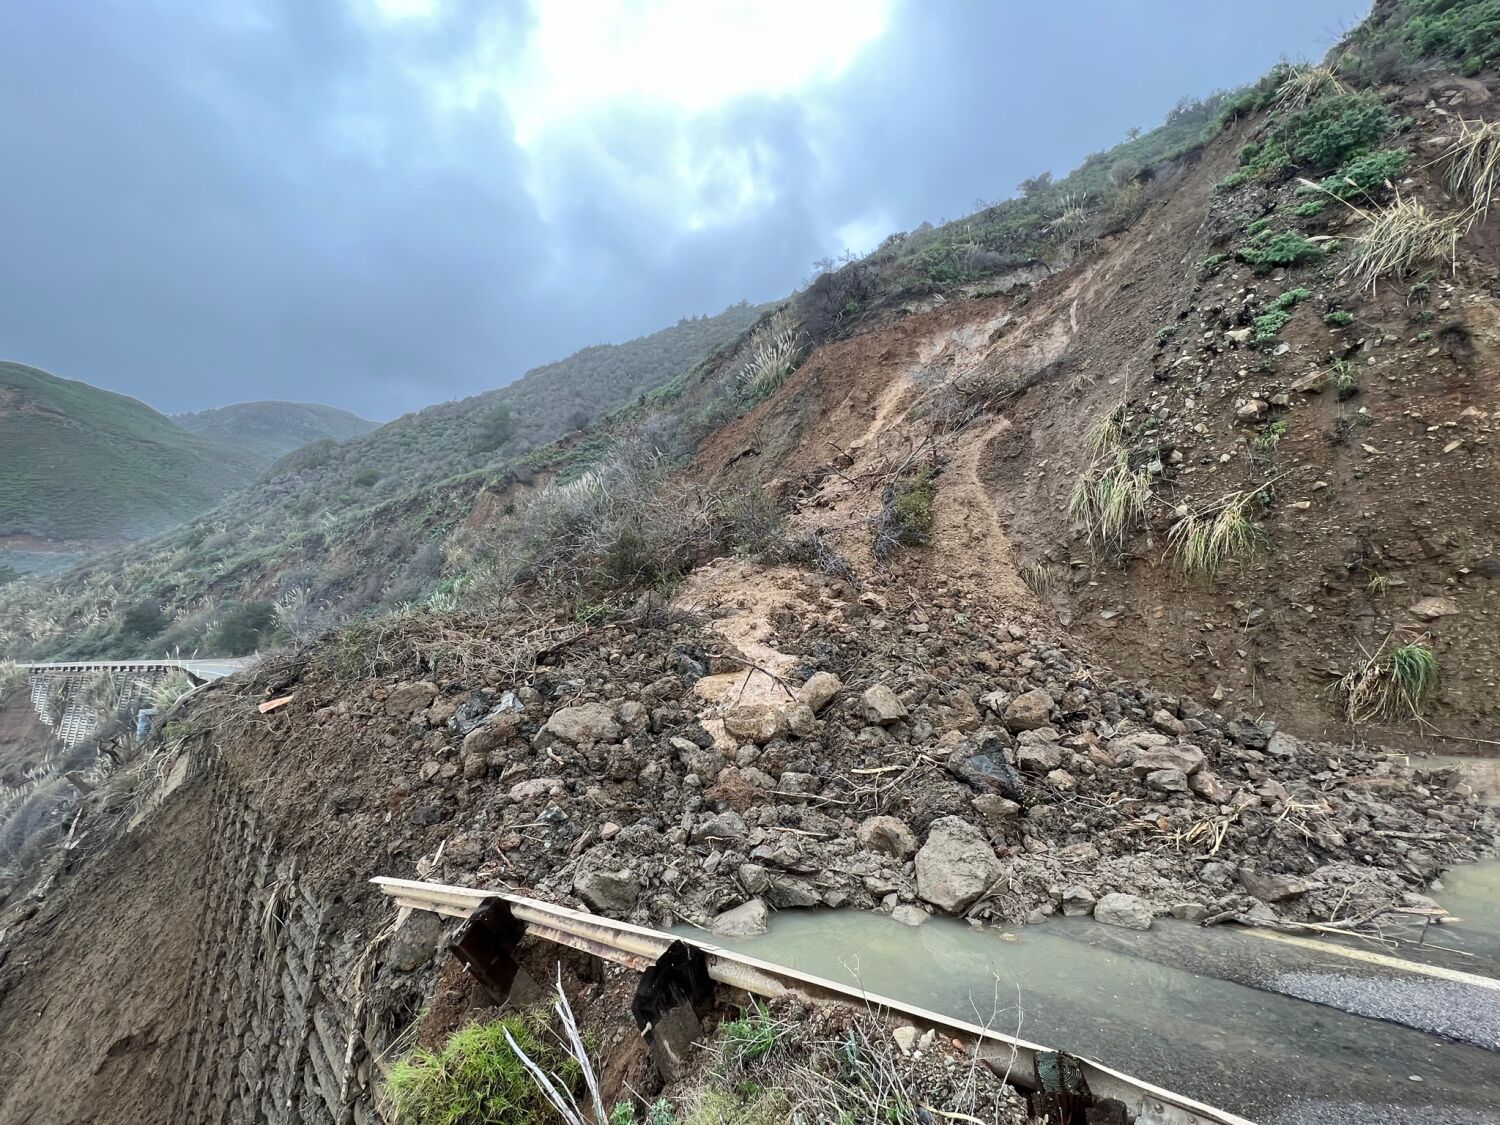 More, but not all, of Highway 1 to reopen south of Big Sur